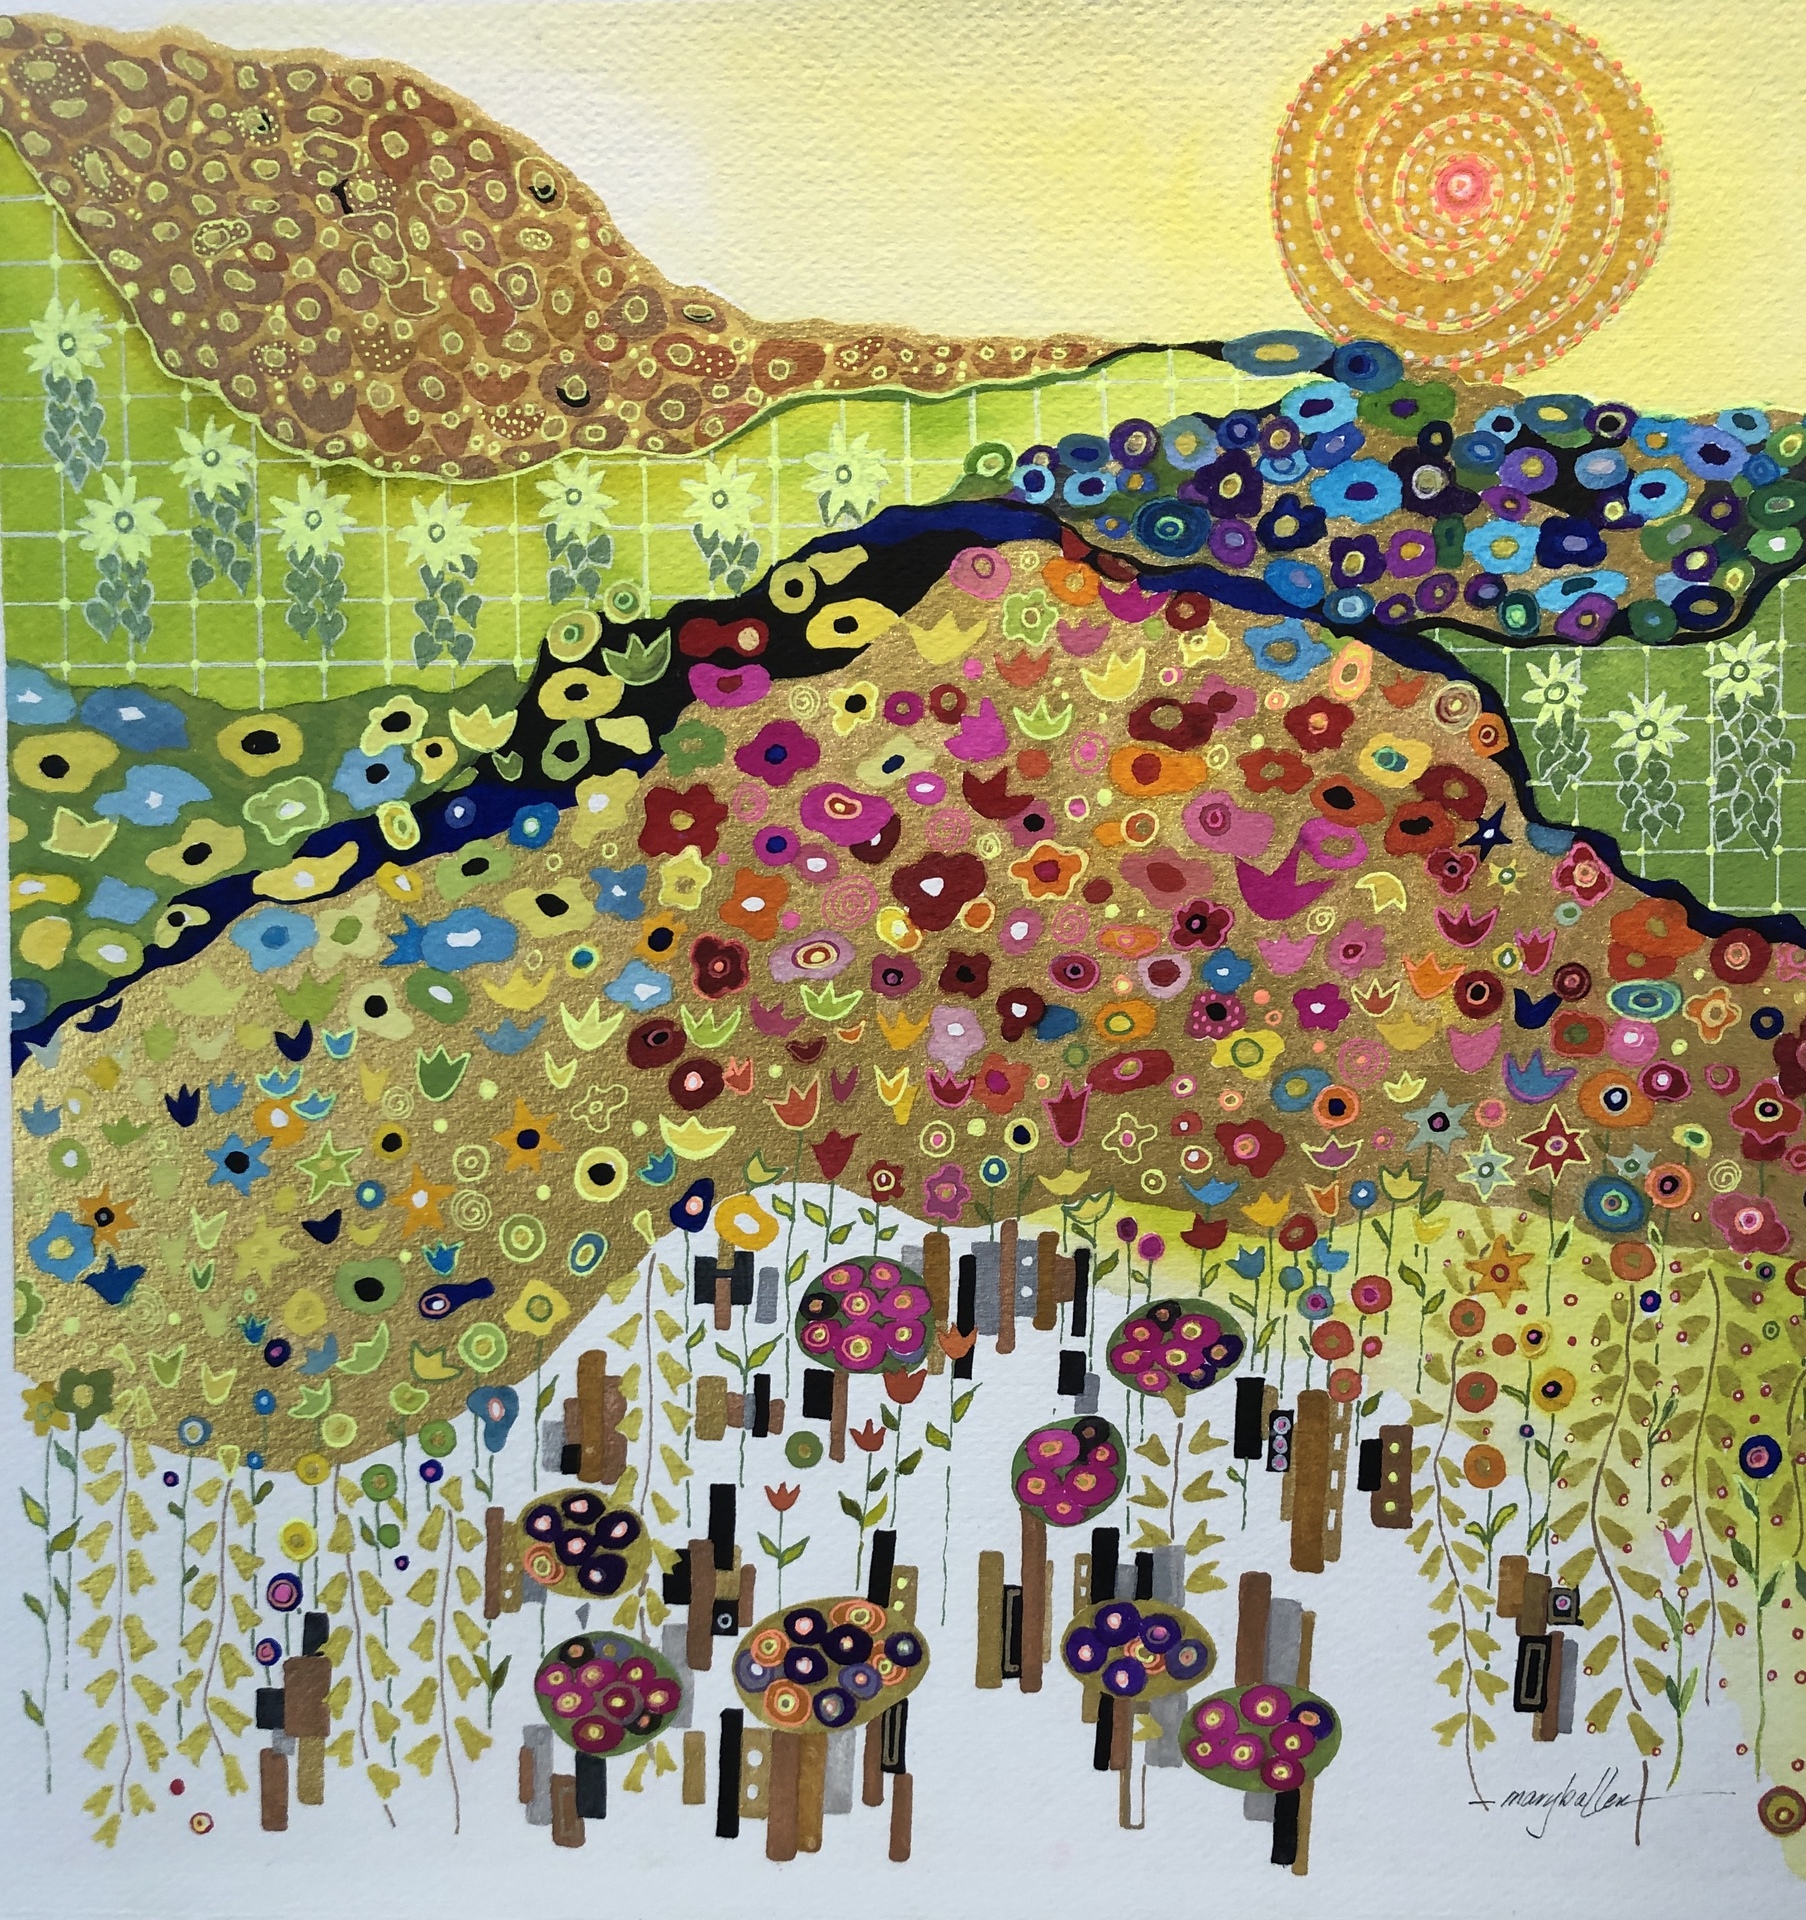 An abstract multicolored depiction of mountains, flowers, and a setting or rising sun.